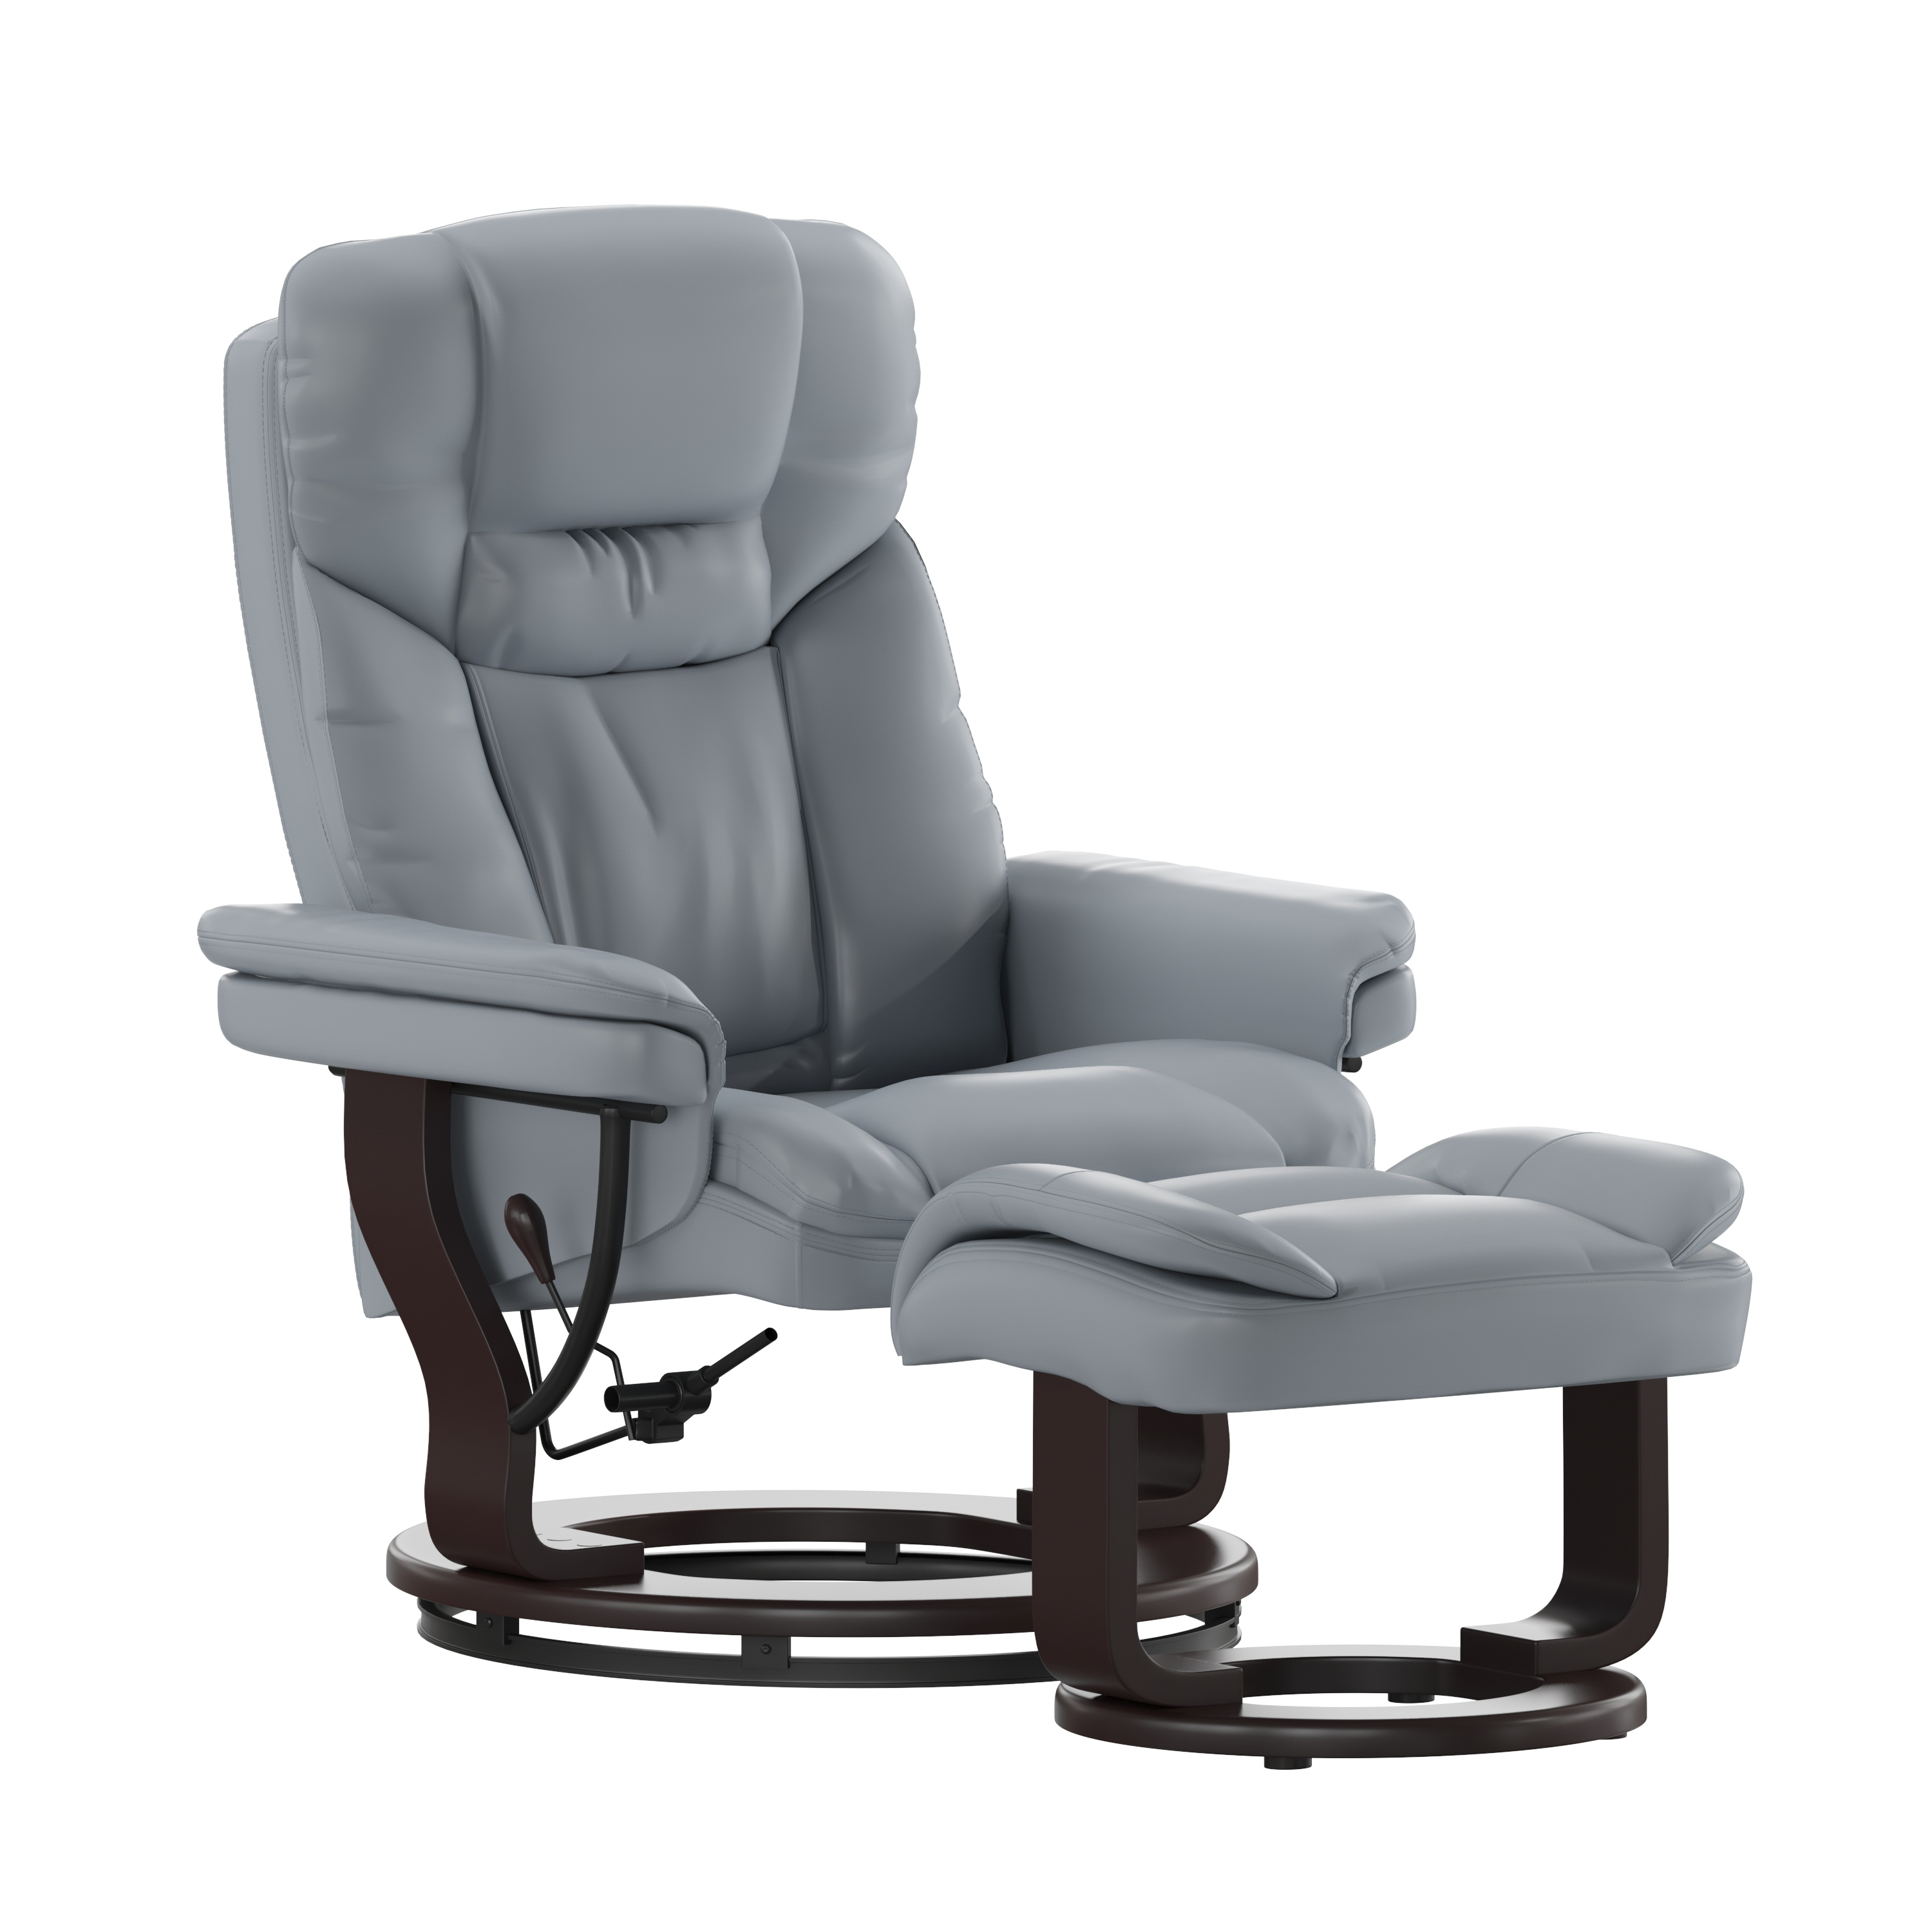 Flash Furniture BT-7821-GY-GG Gray LeatherSoft Swivel Recliner Chair with Ottoman Footrest